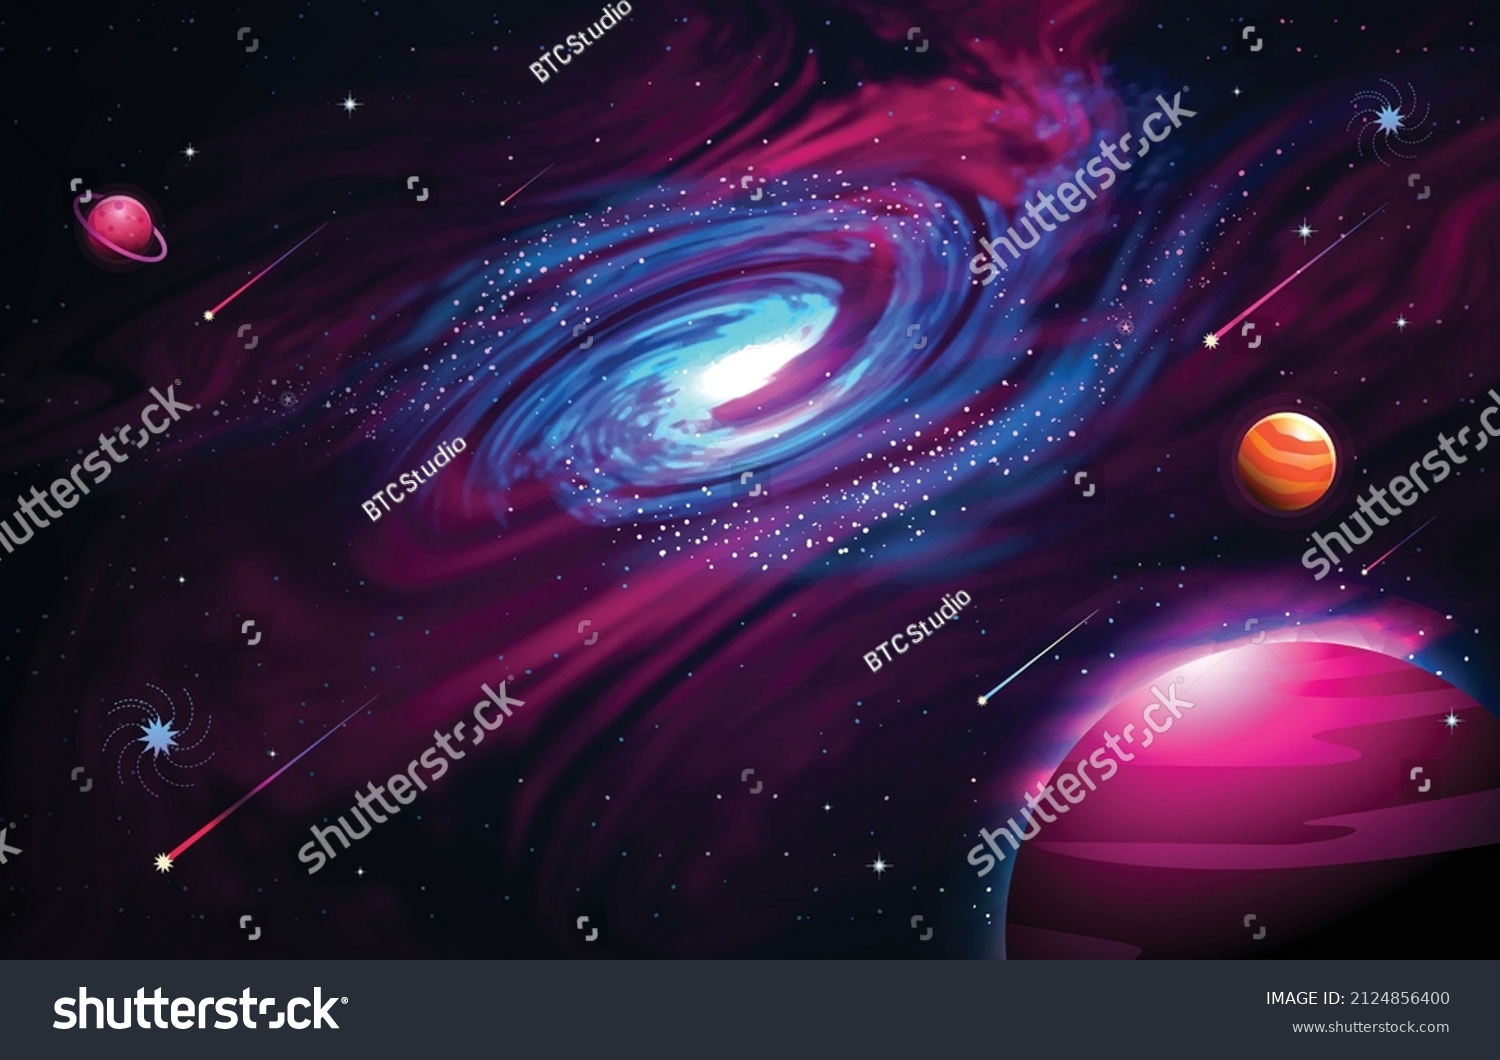 Space galaxy background with saturn planet and asteroids, cartoon universe texture. Vector starry futuristic surface with purple nebula, cosmos dust scenery. Deep purple sky with stars and planets #2124856400